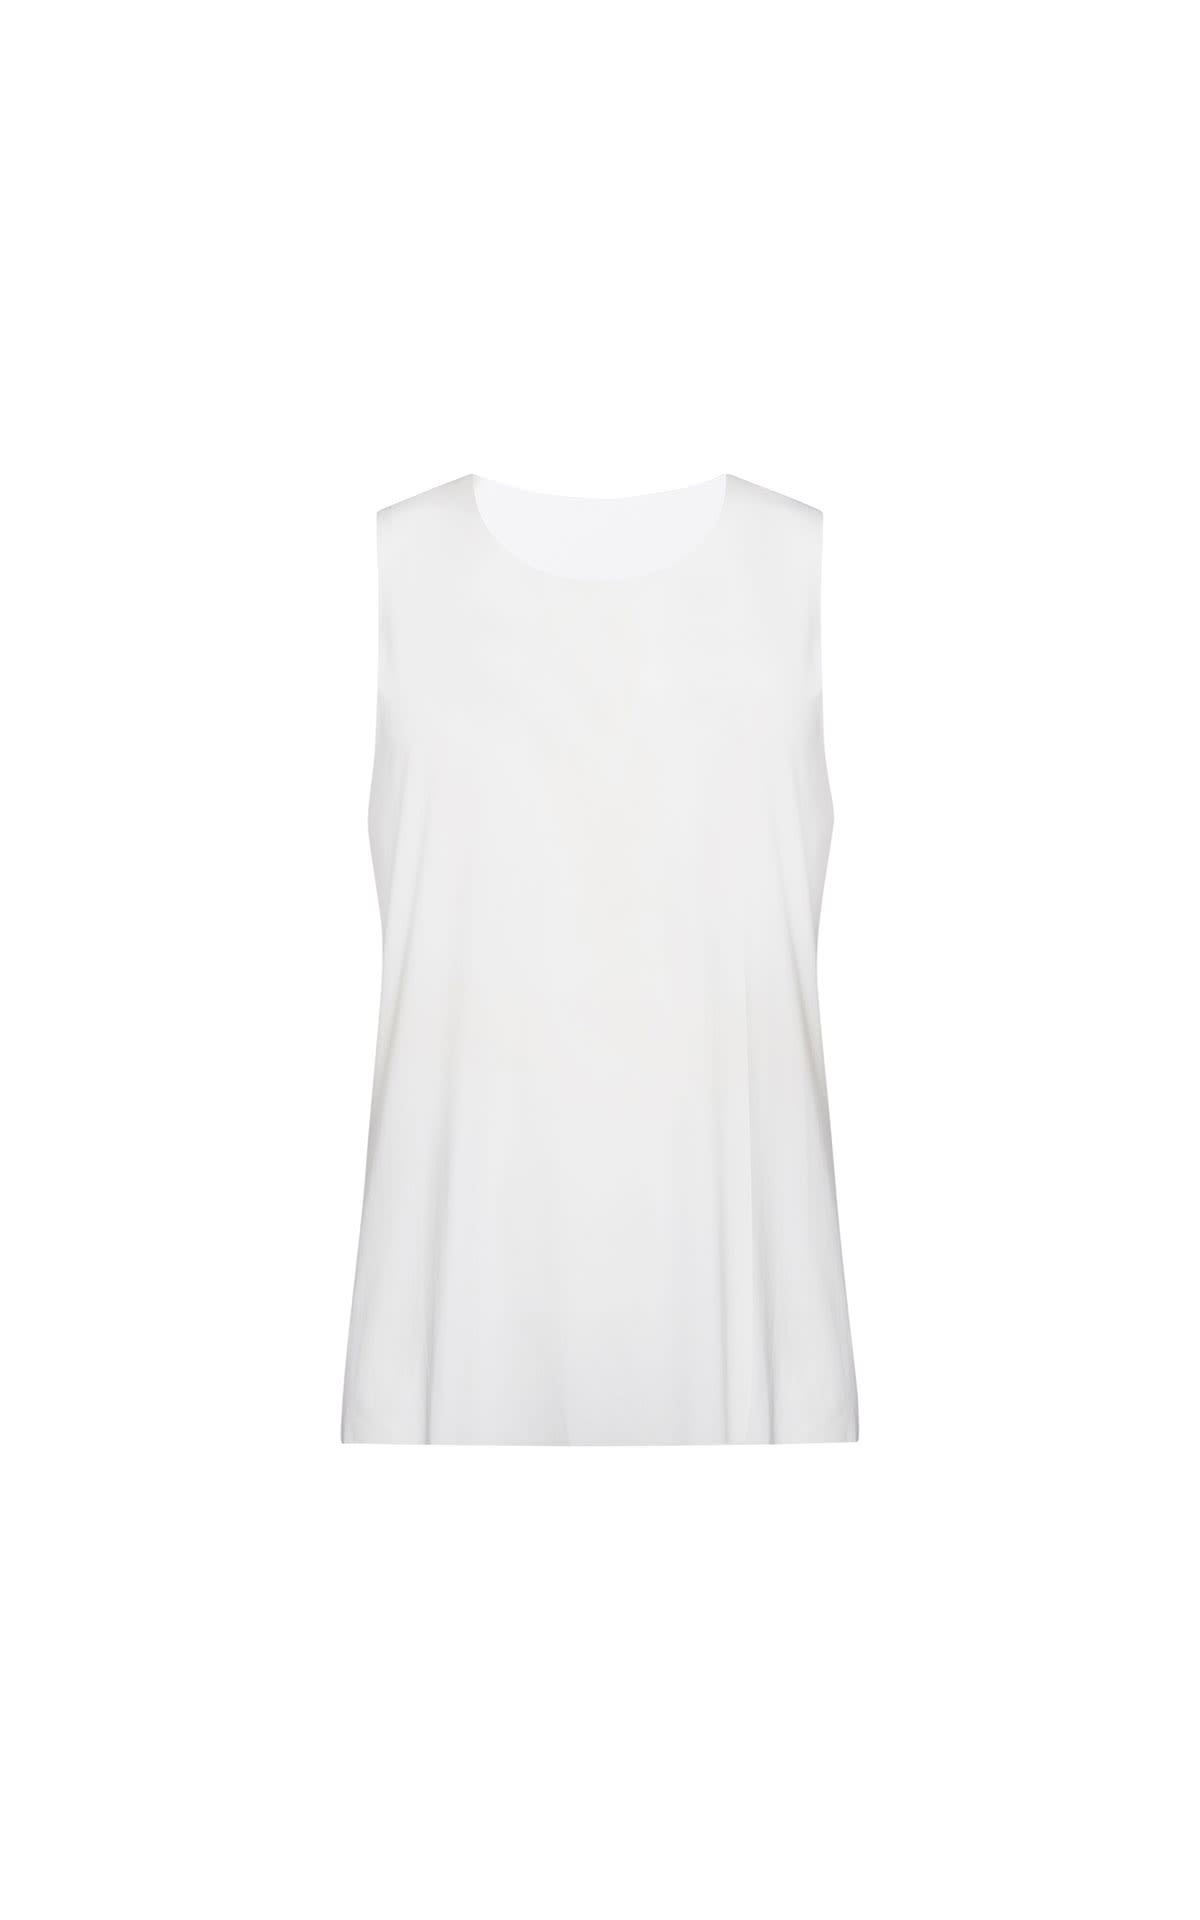 Wolford Men’s pure tank top from Bicester Village